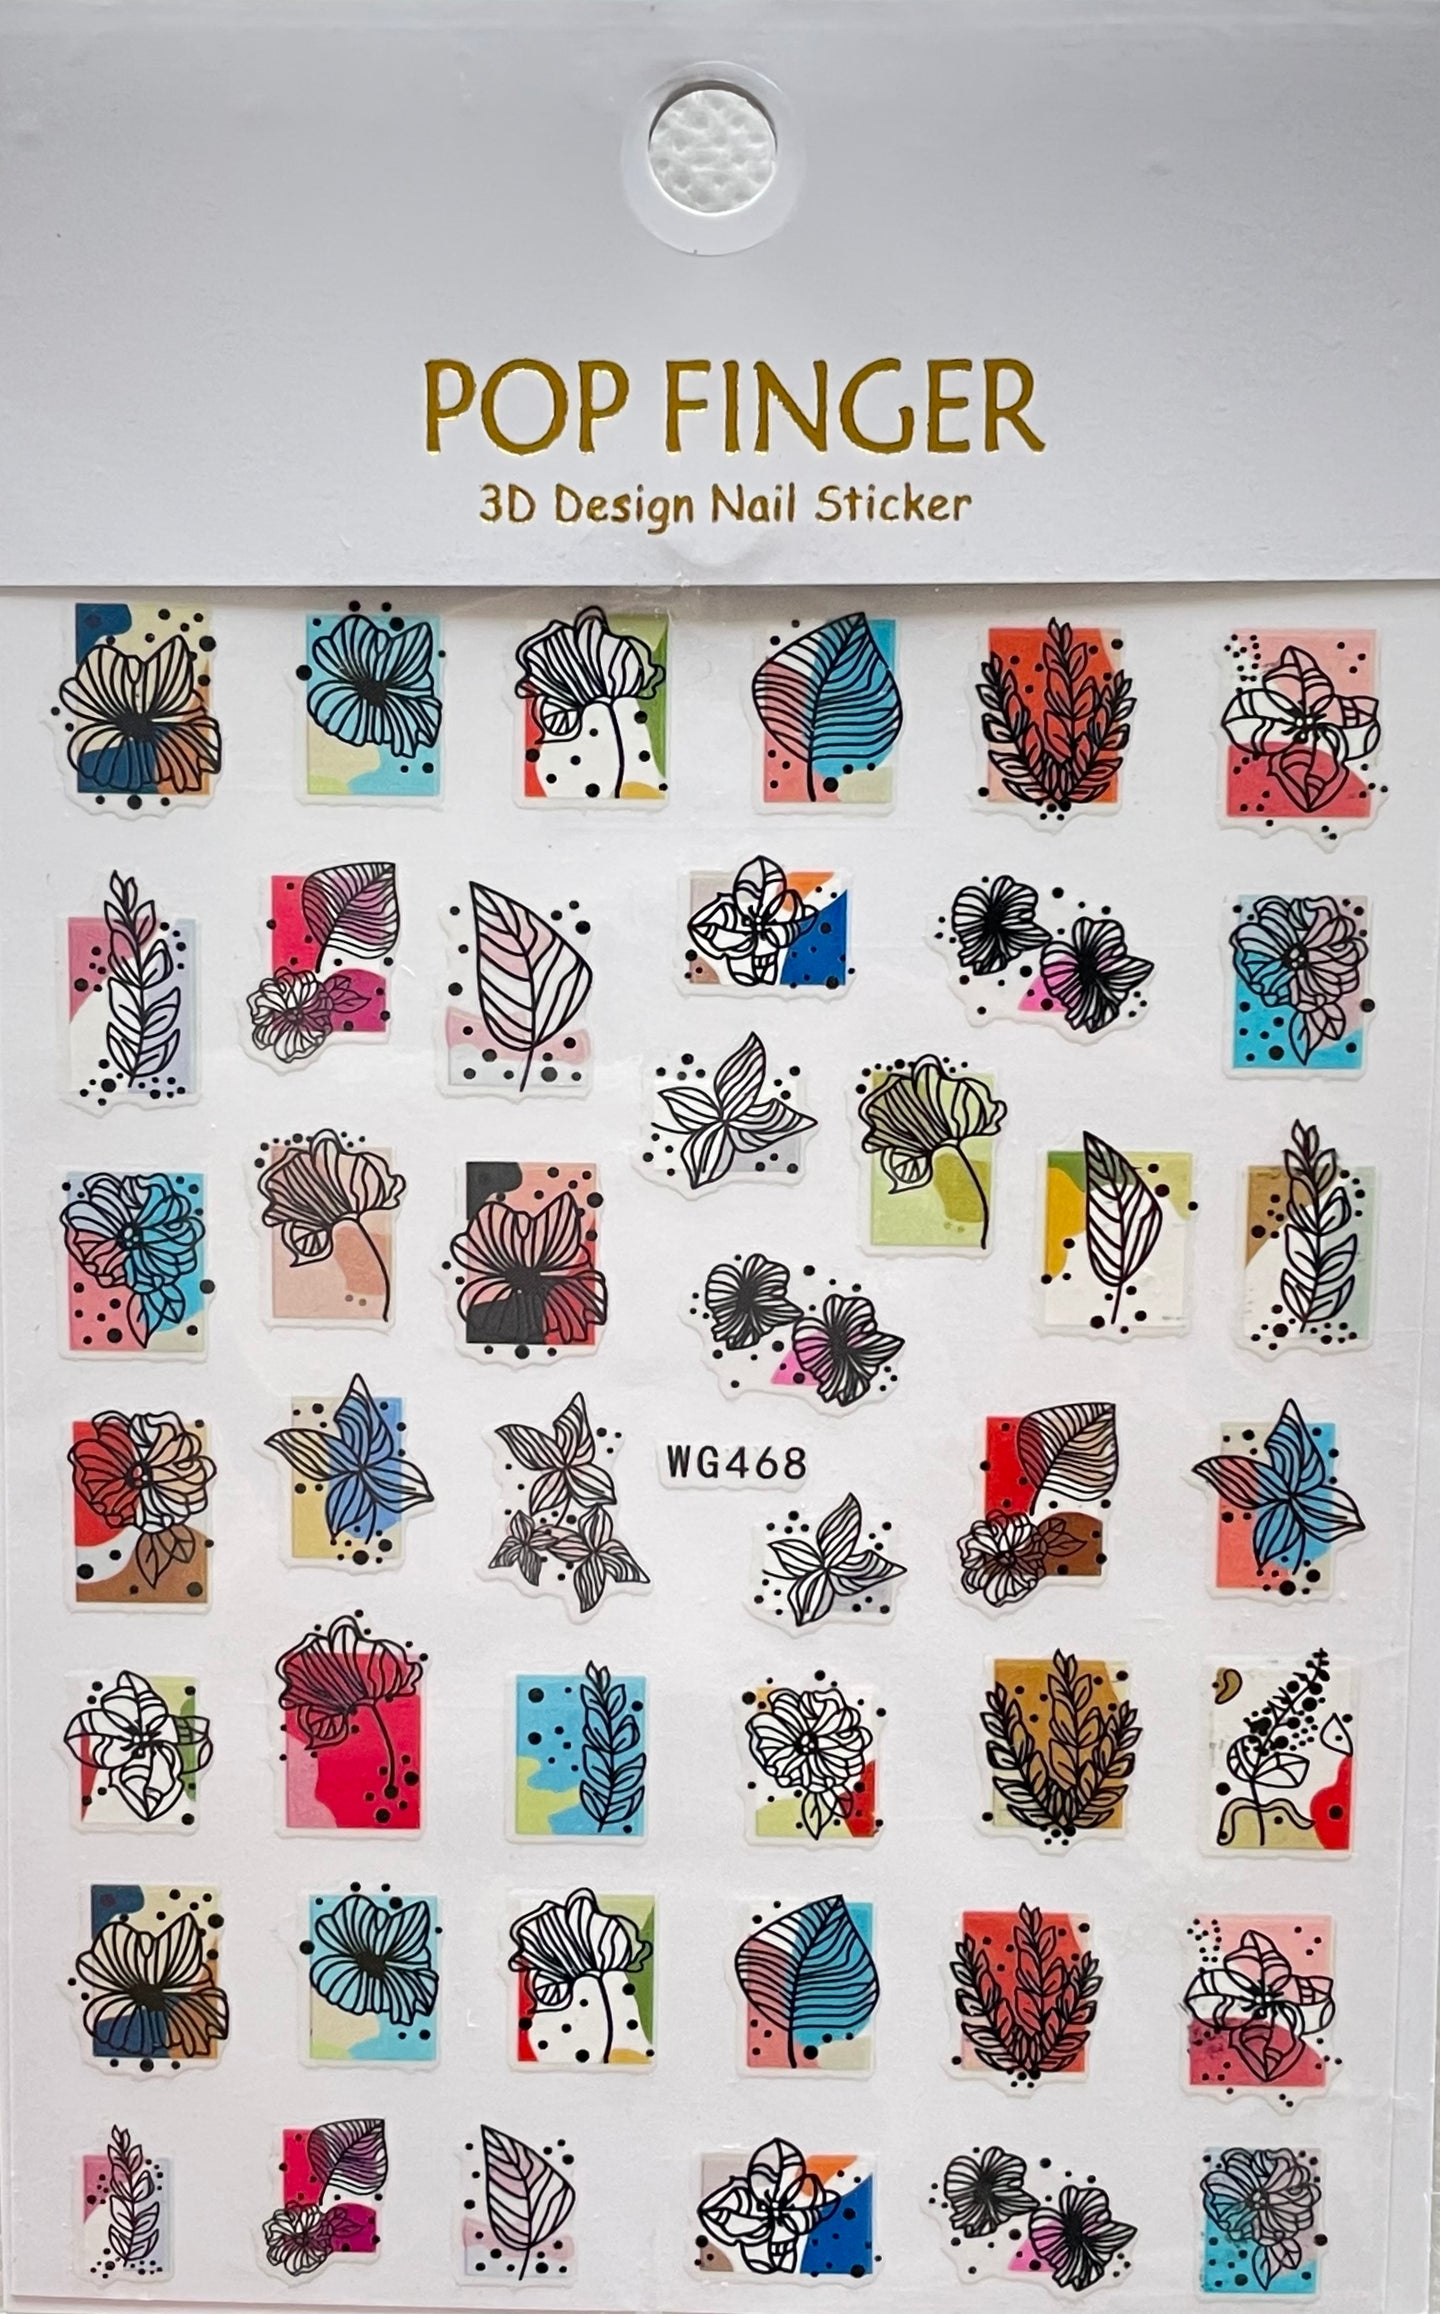 3D Nail Art Sticker Cartoon Pattern Fly Bird Adhesive Nail Stickers  Manicure Stencil Tips Polish Decals From Healthbeautysuperior, $1.18 |  DHgate.Com